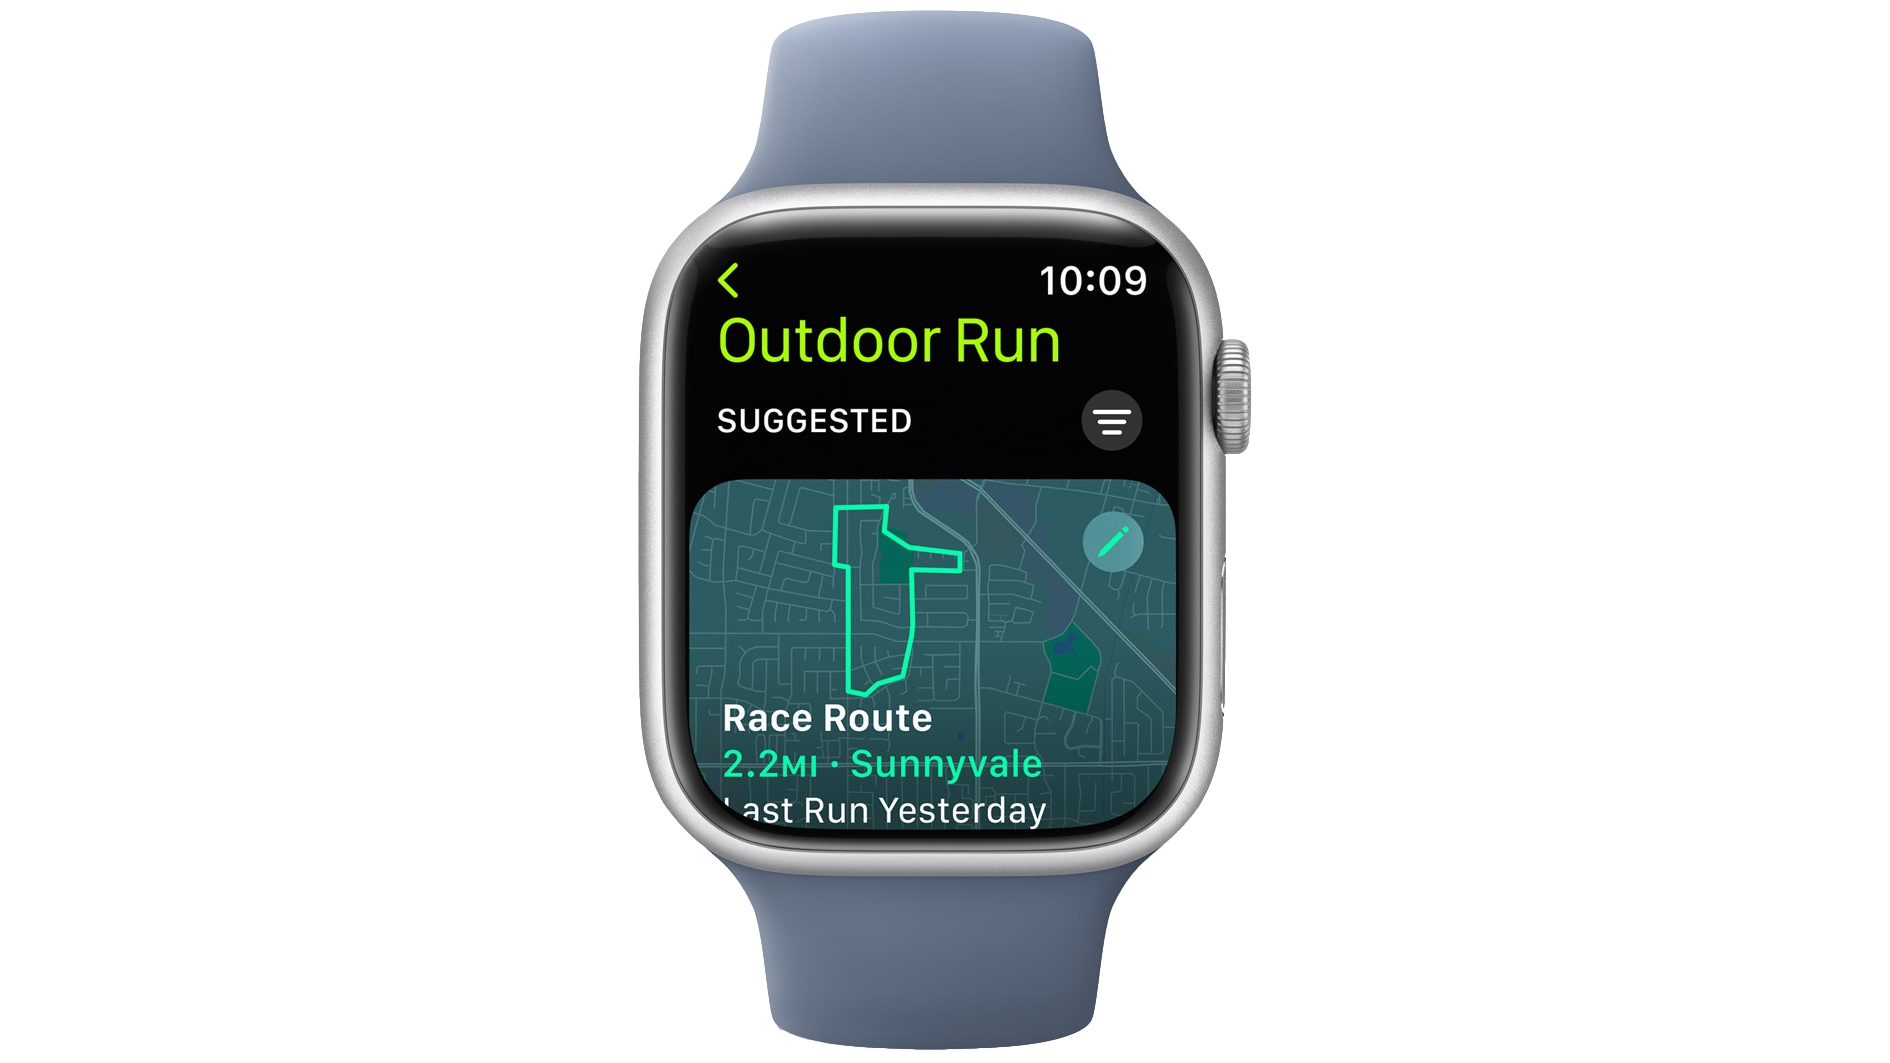 The race route feature in the Workout app on Apple Watch